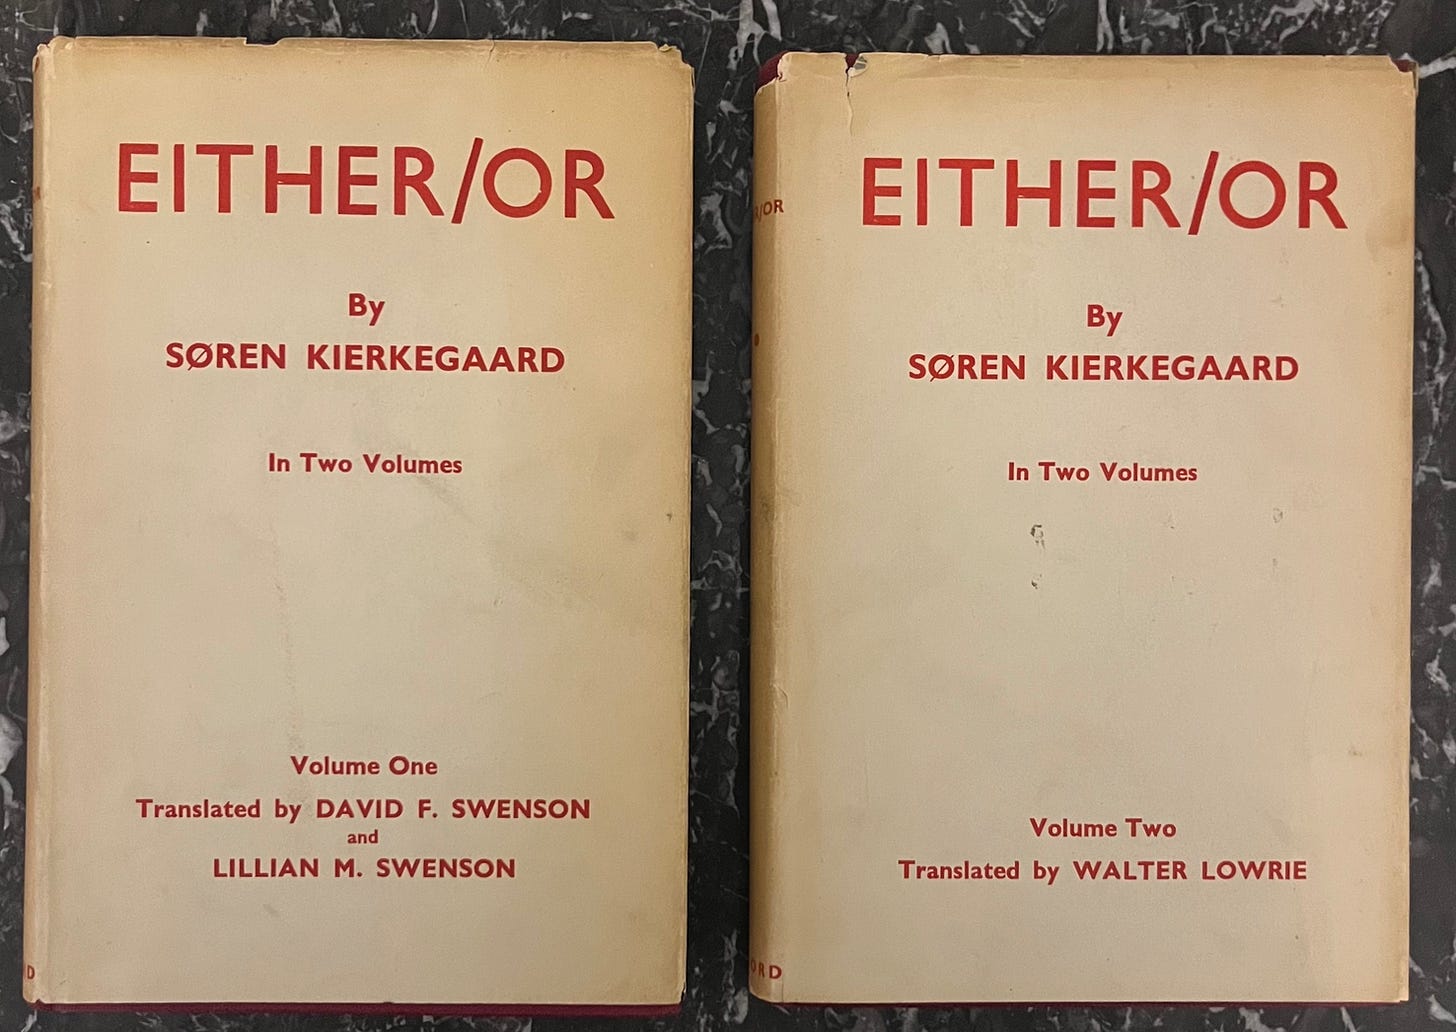 A photo of Kierkegaard's Either/Or